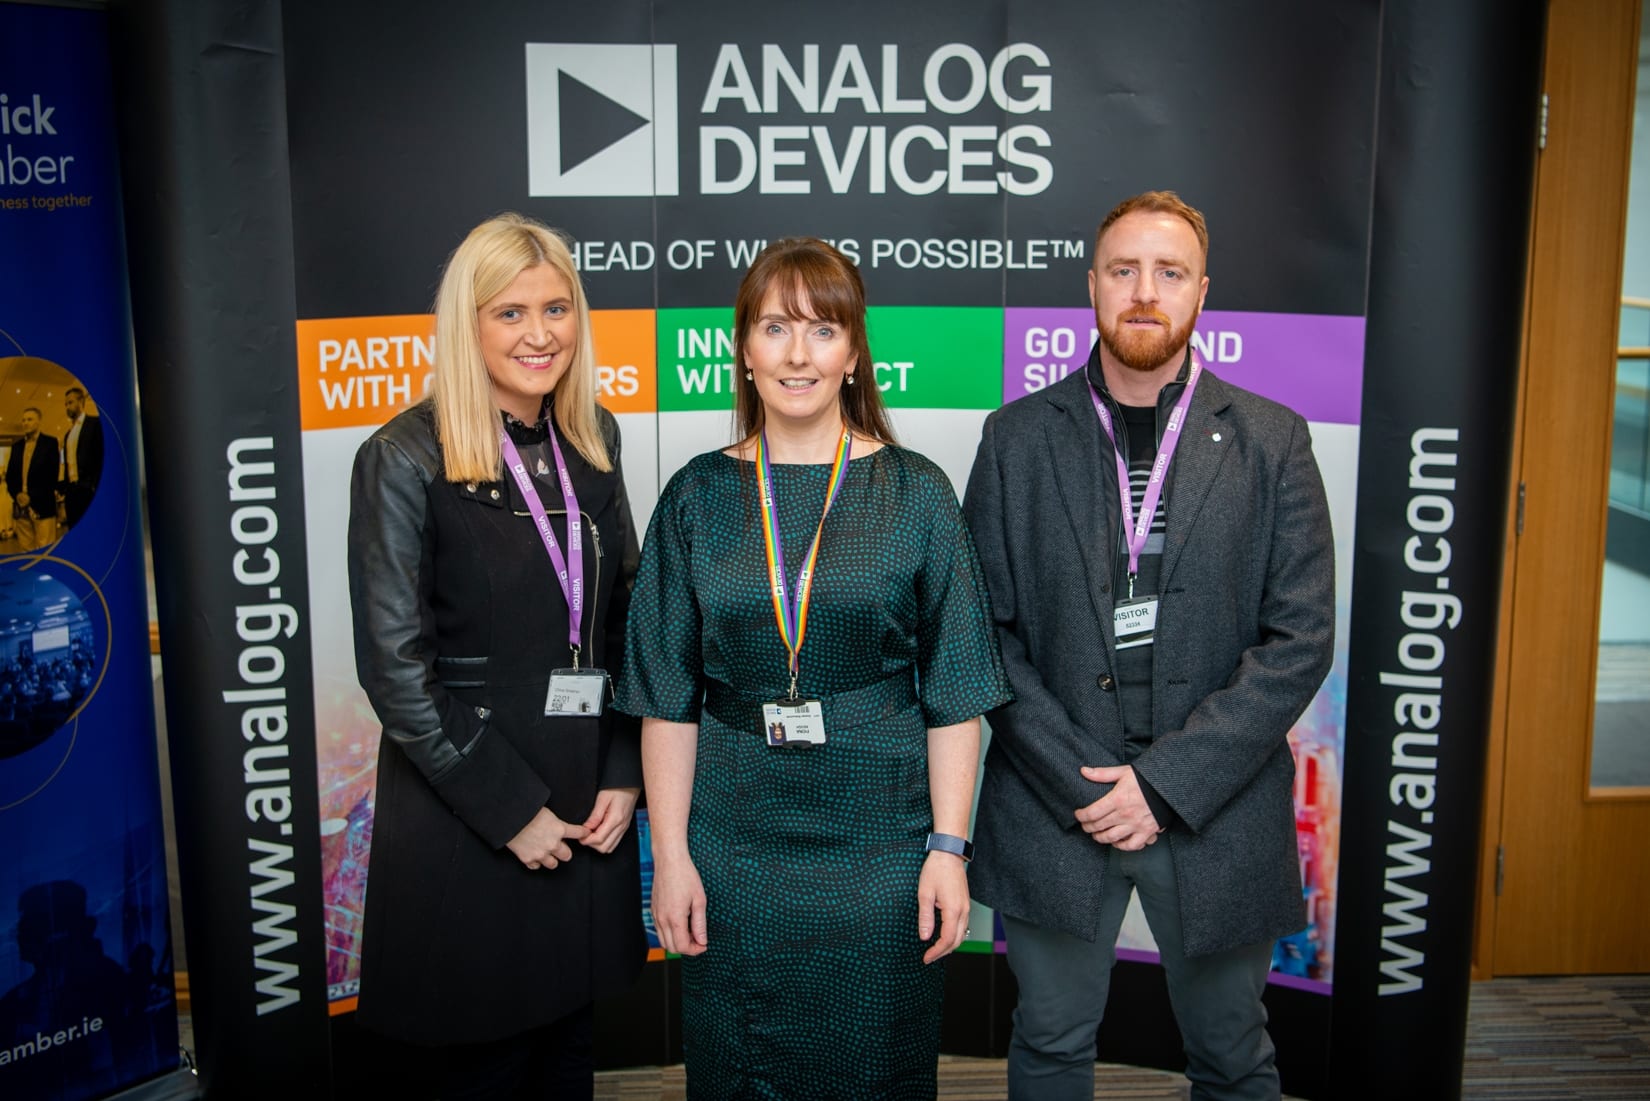 No repro fee- Building your Employer Value Proposition event held in Analog Devices in association with Limerick Chamber on Wednesday 22nd January 2020  - From Left to Right: Fiona Keogh - Analog Devices International. 
Chloe Sheehan - Teckro, Fiona Keogh - Analog Devices International, James Mackey - Teckro. 
Photo credit Shauna Kennedy